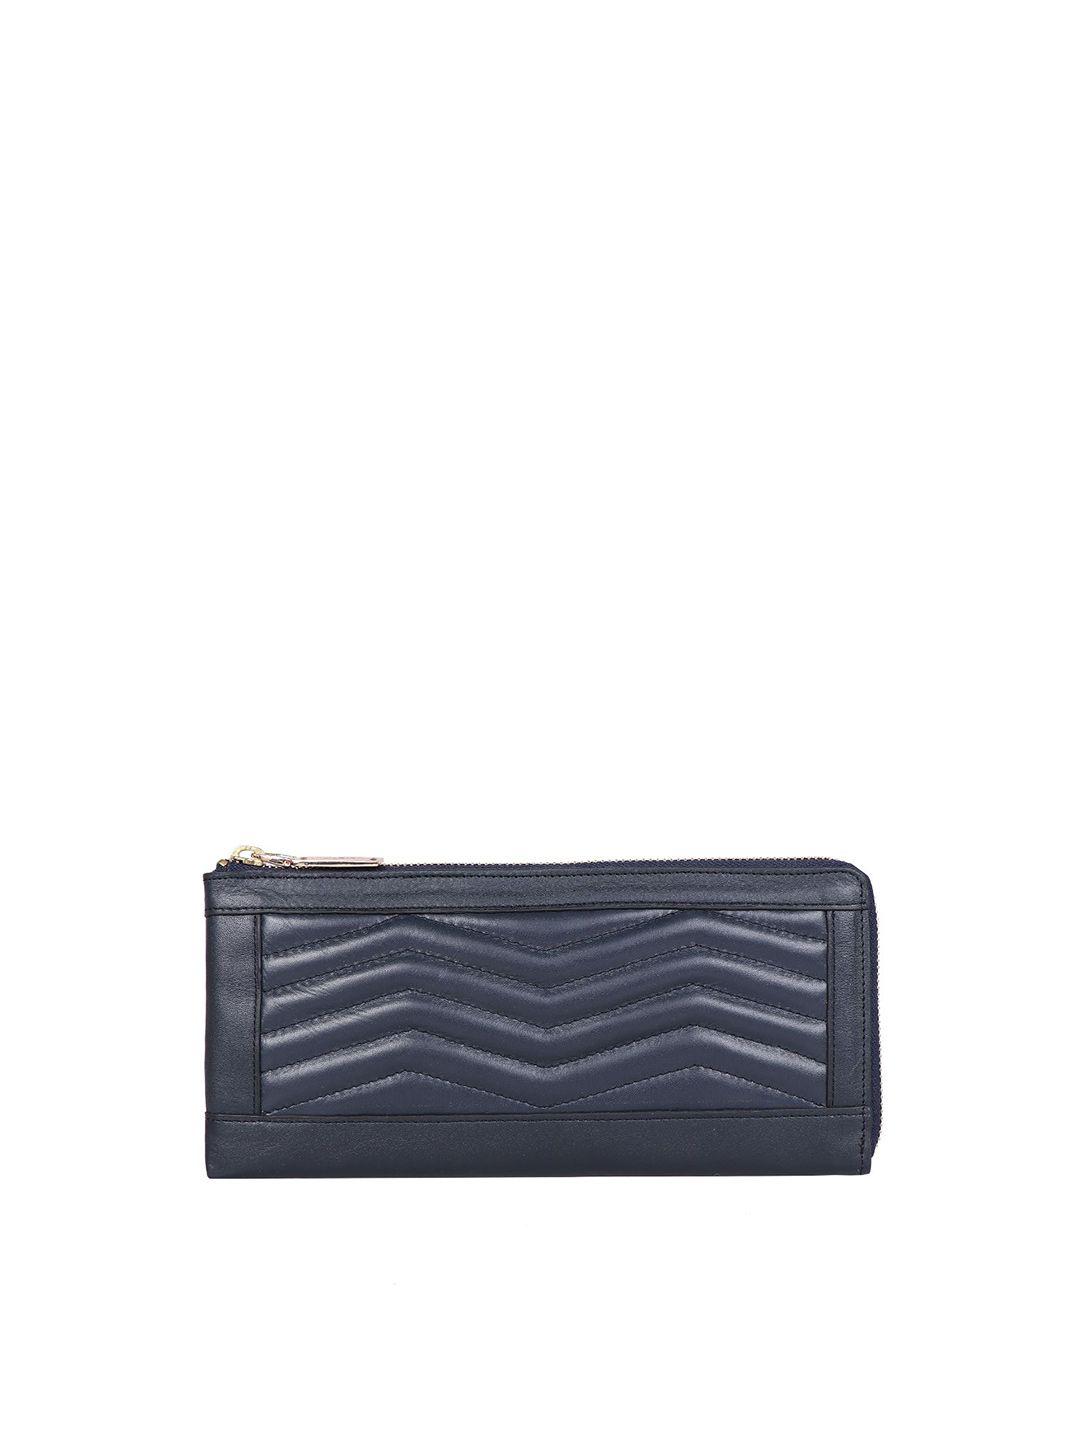 hidesign blue textured quilted purse